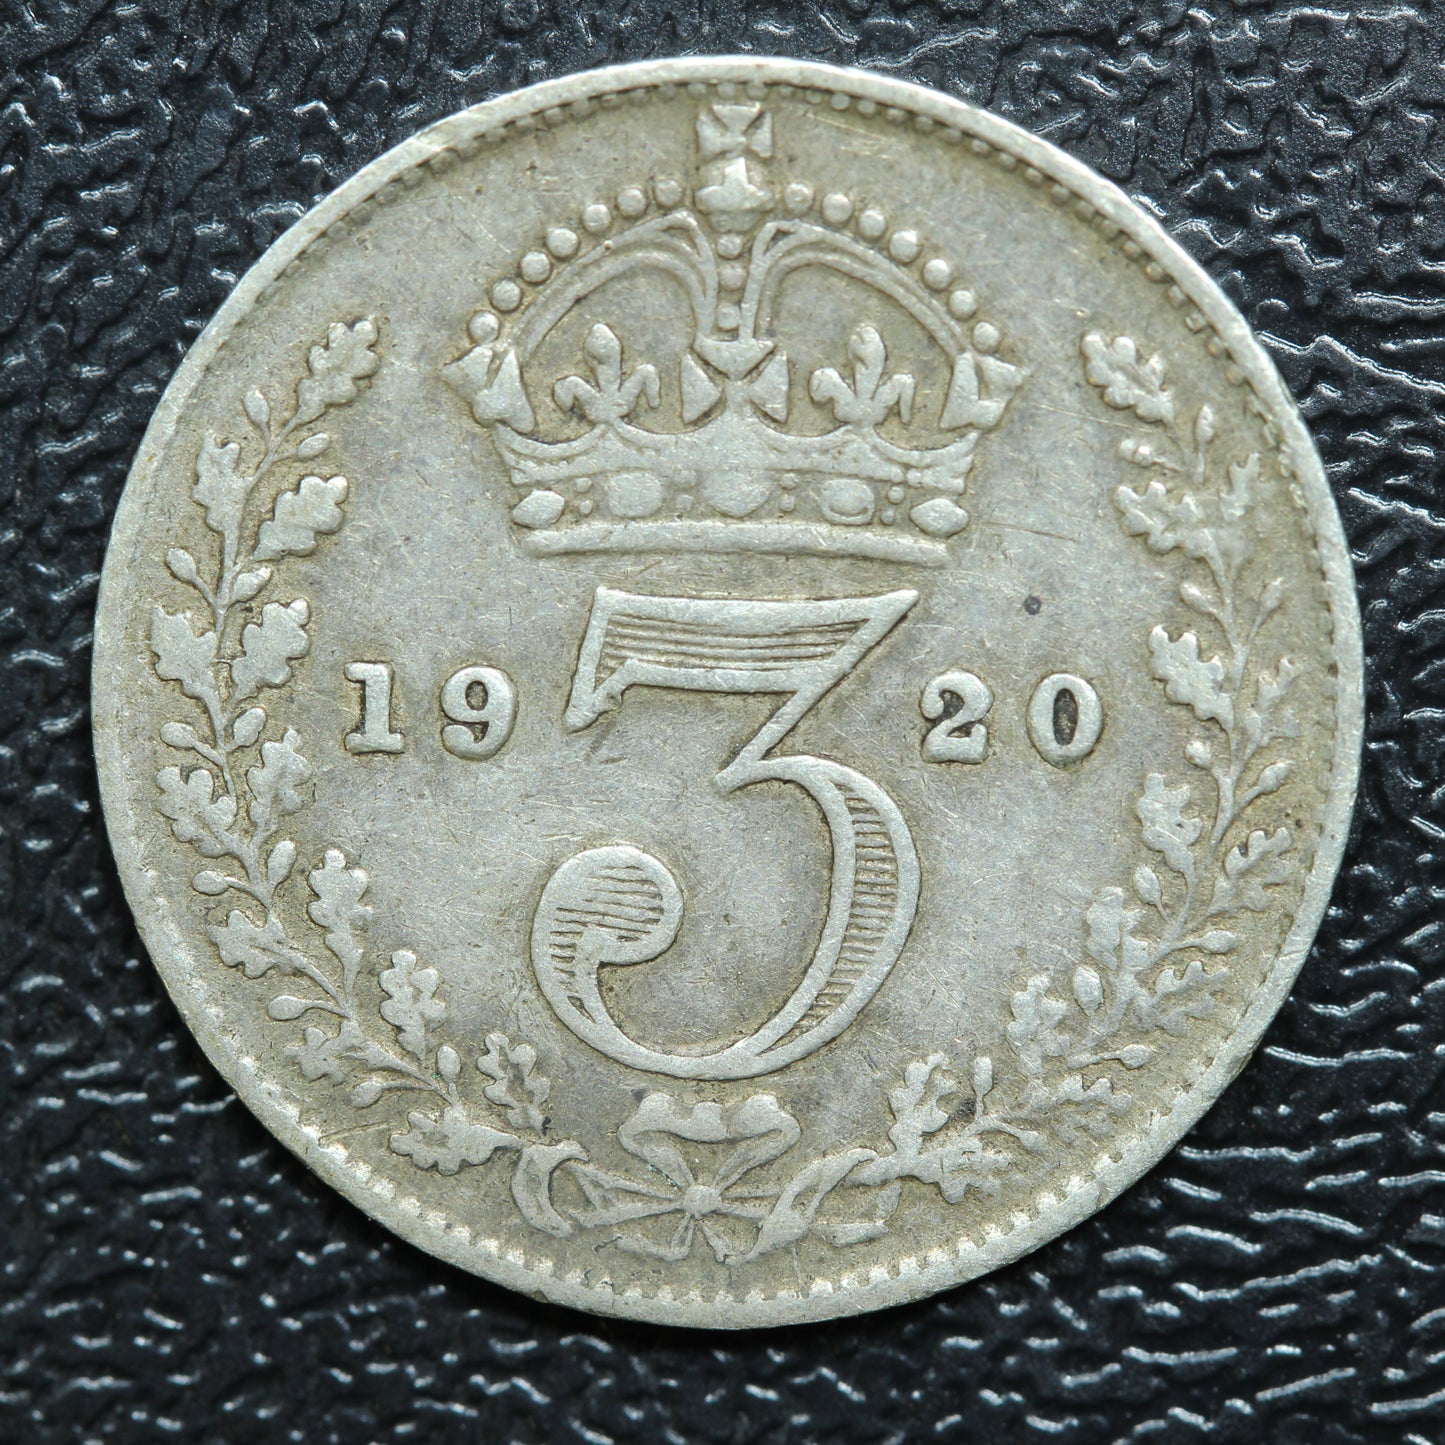 1920 Great Britain 3 Pence Threepence Silver Coin - KM# 813